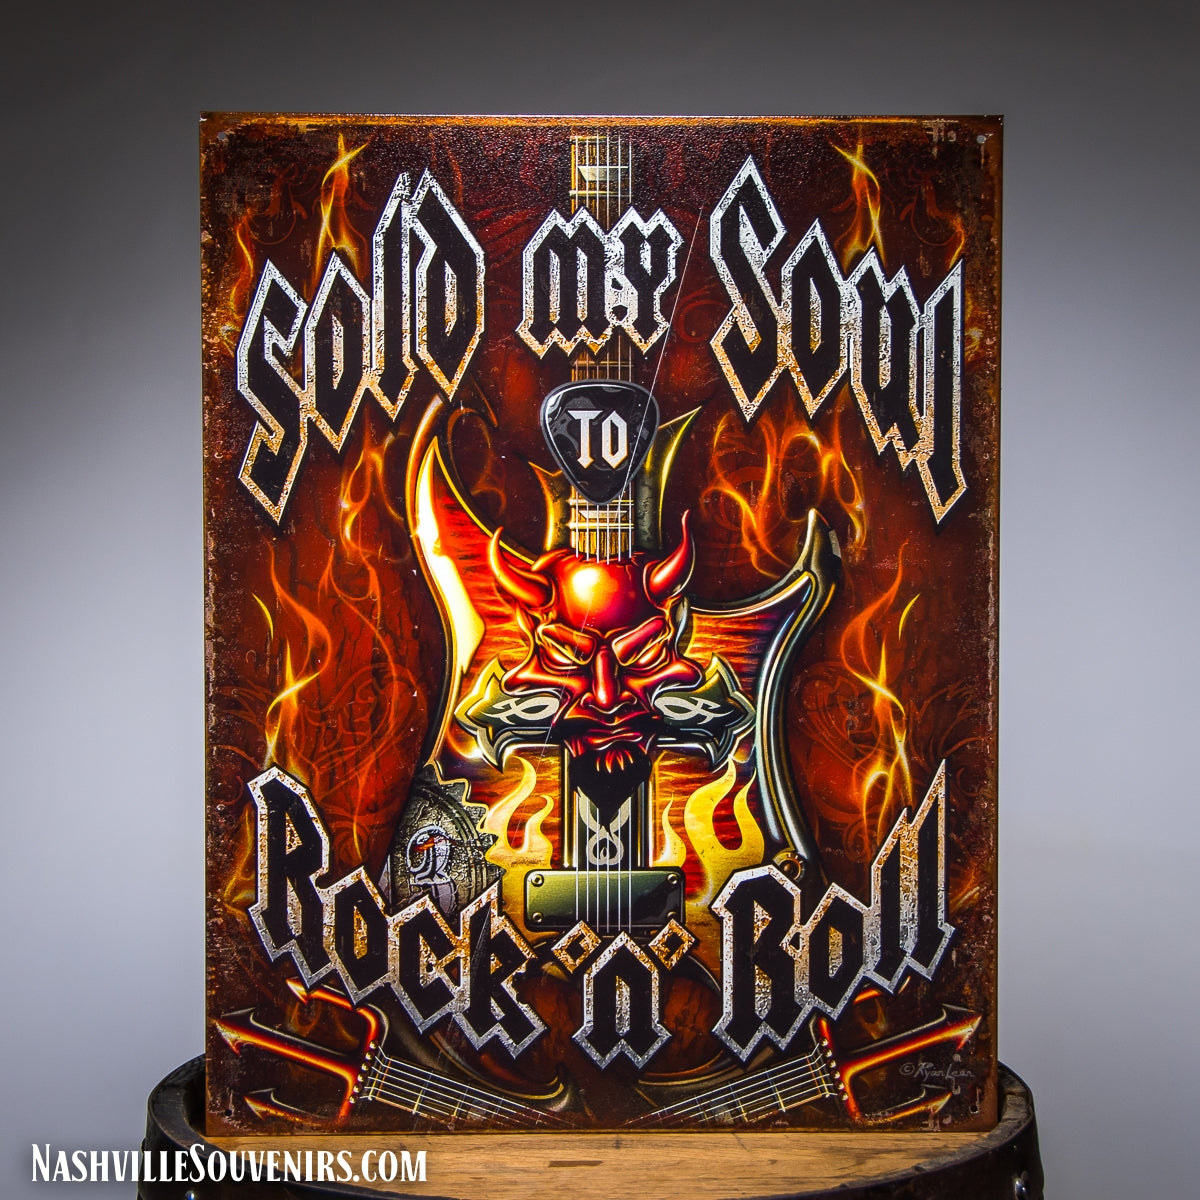 Sold my Soul to Rock n Roll Tin Sign